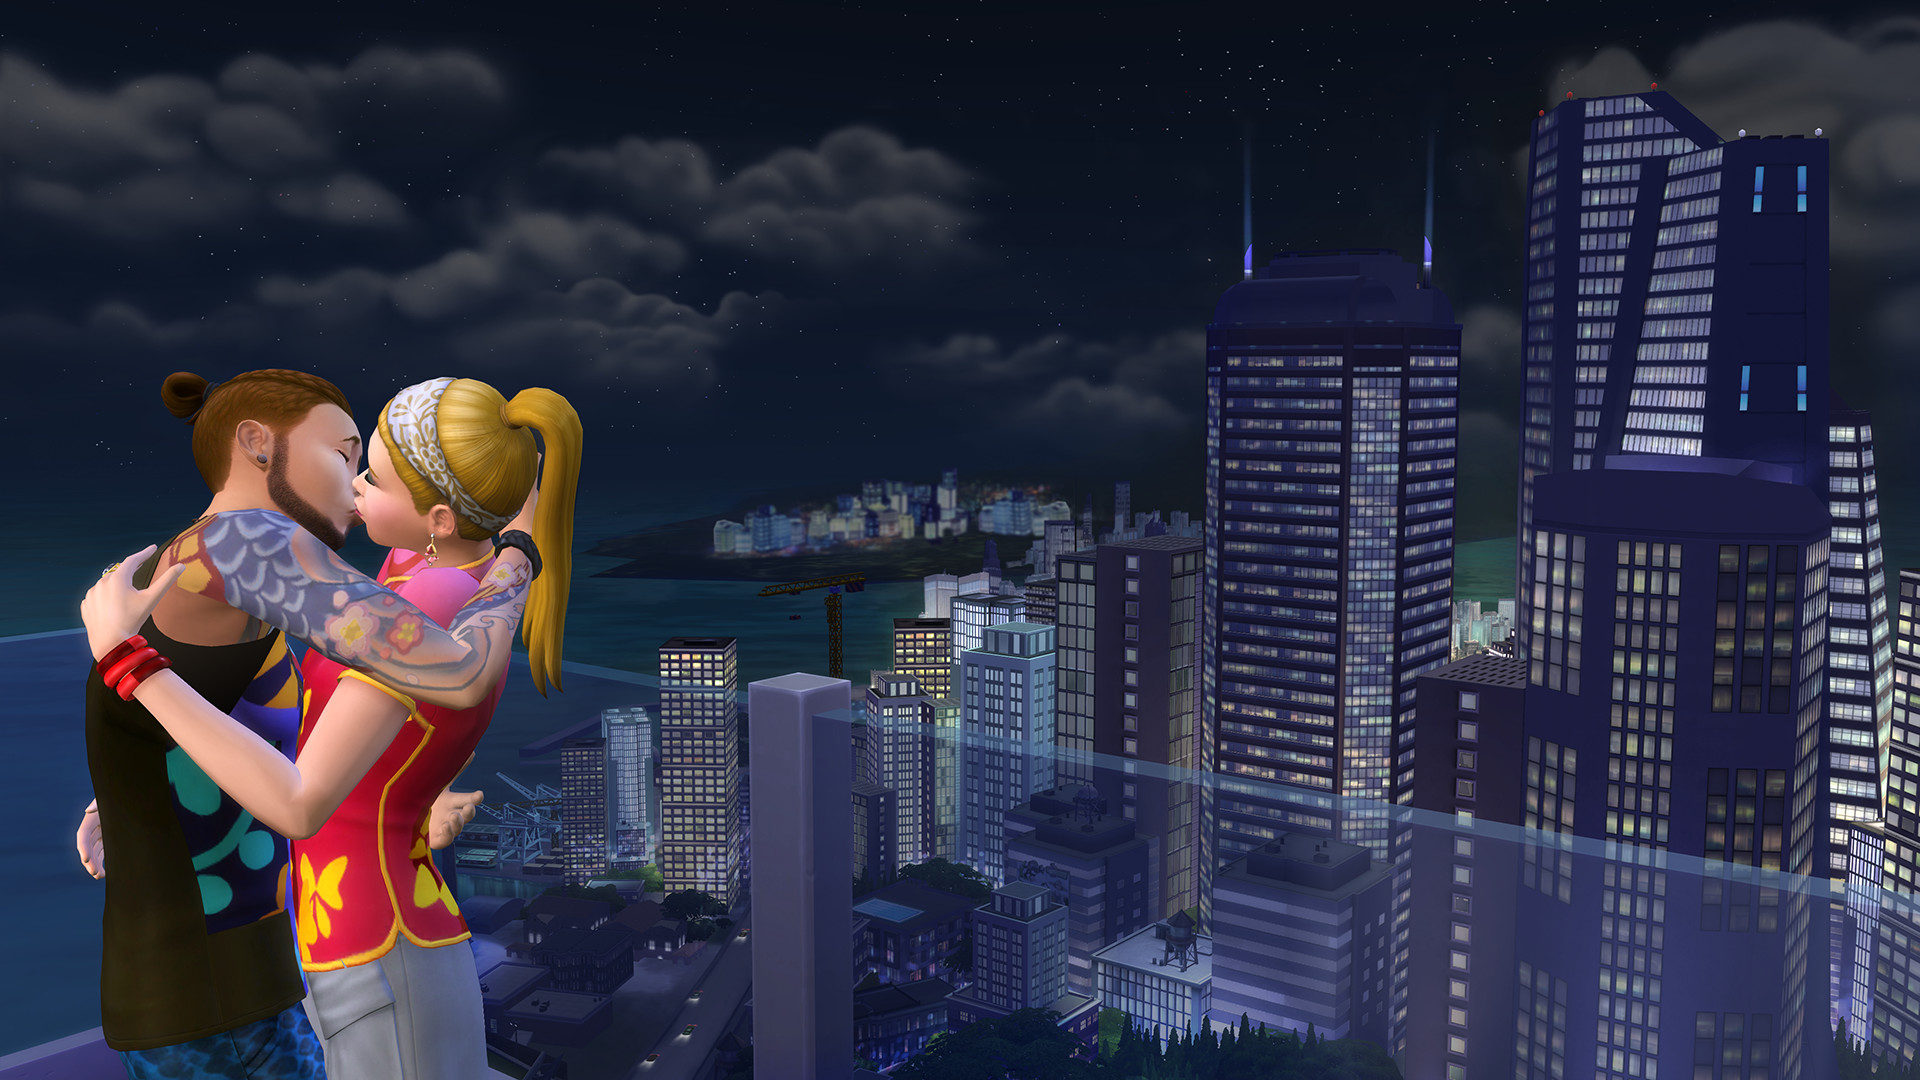 The Sims 4 City Living is FREE for Trial this Weekend!